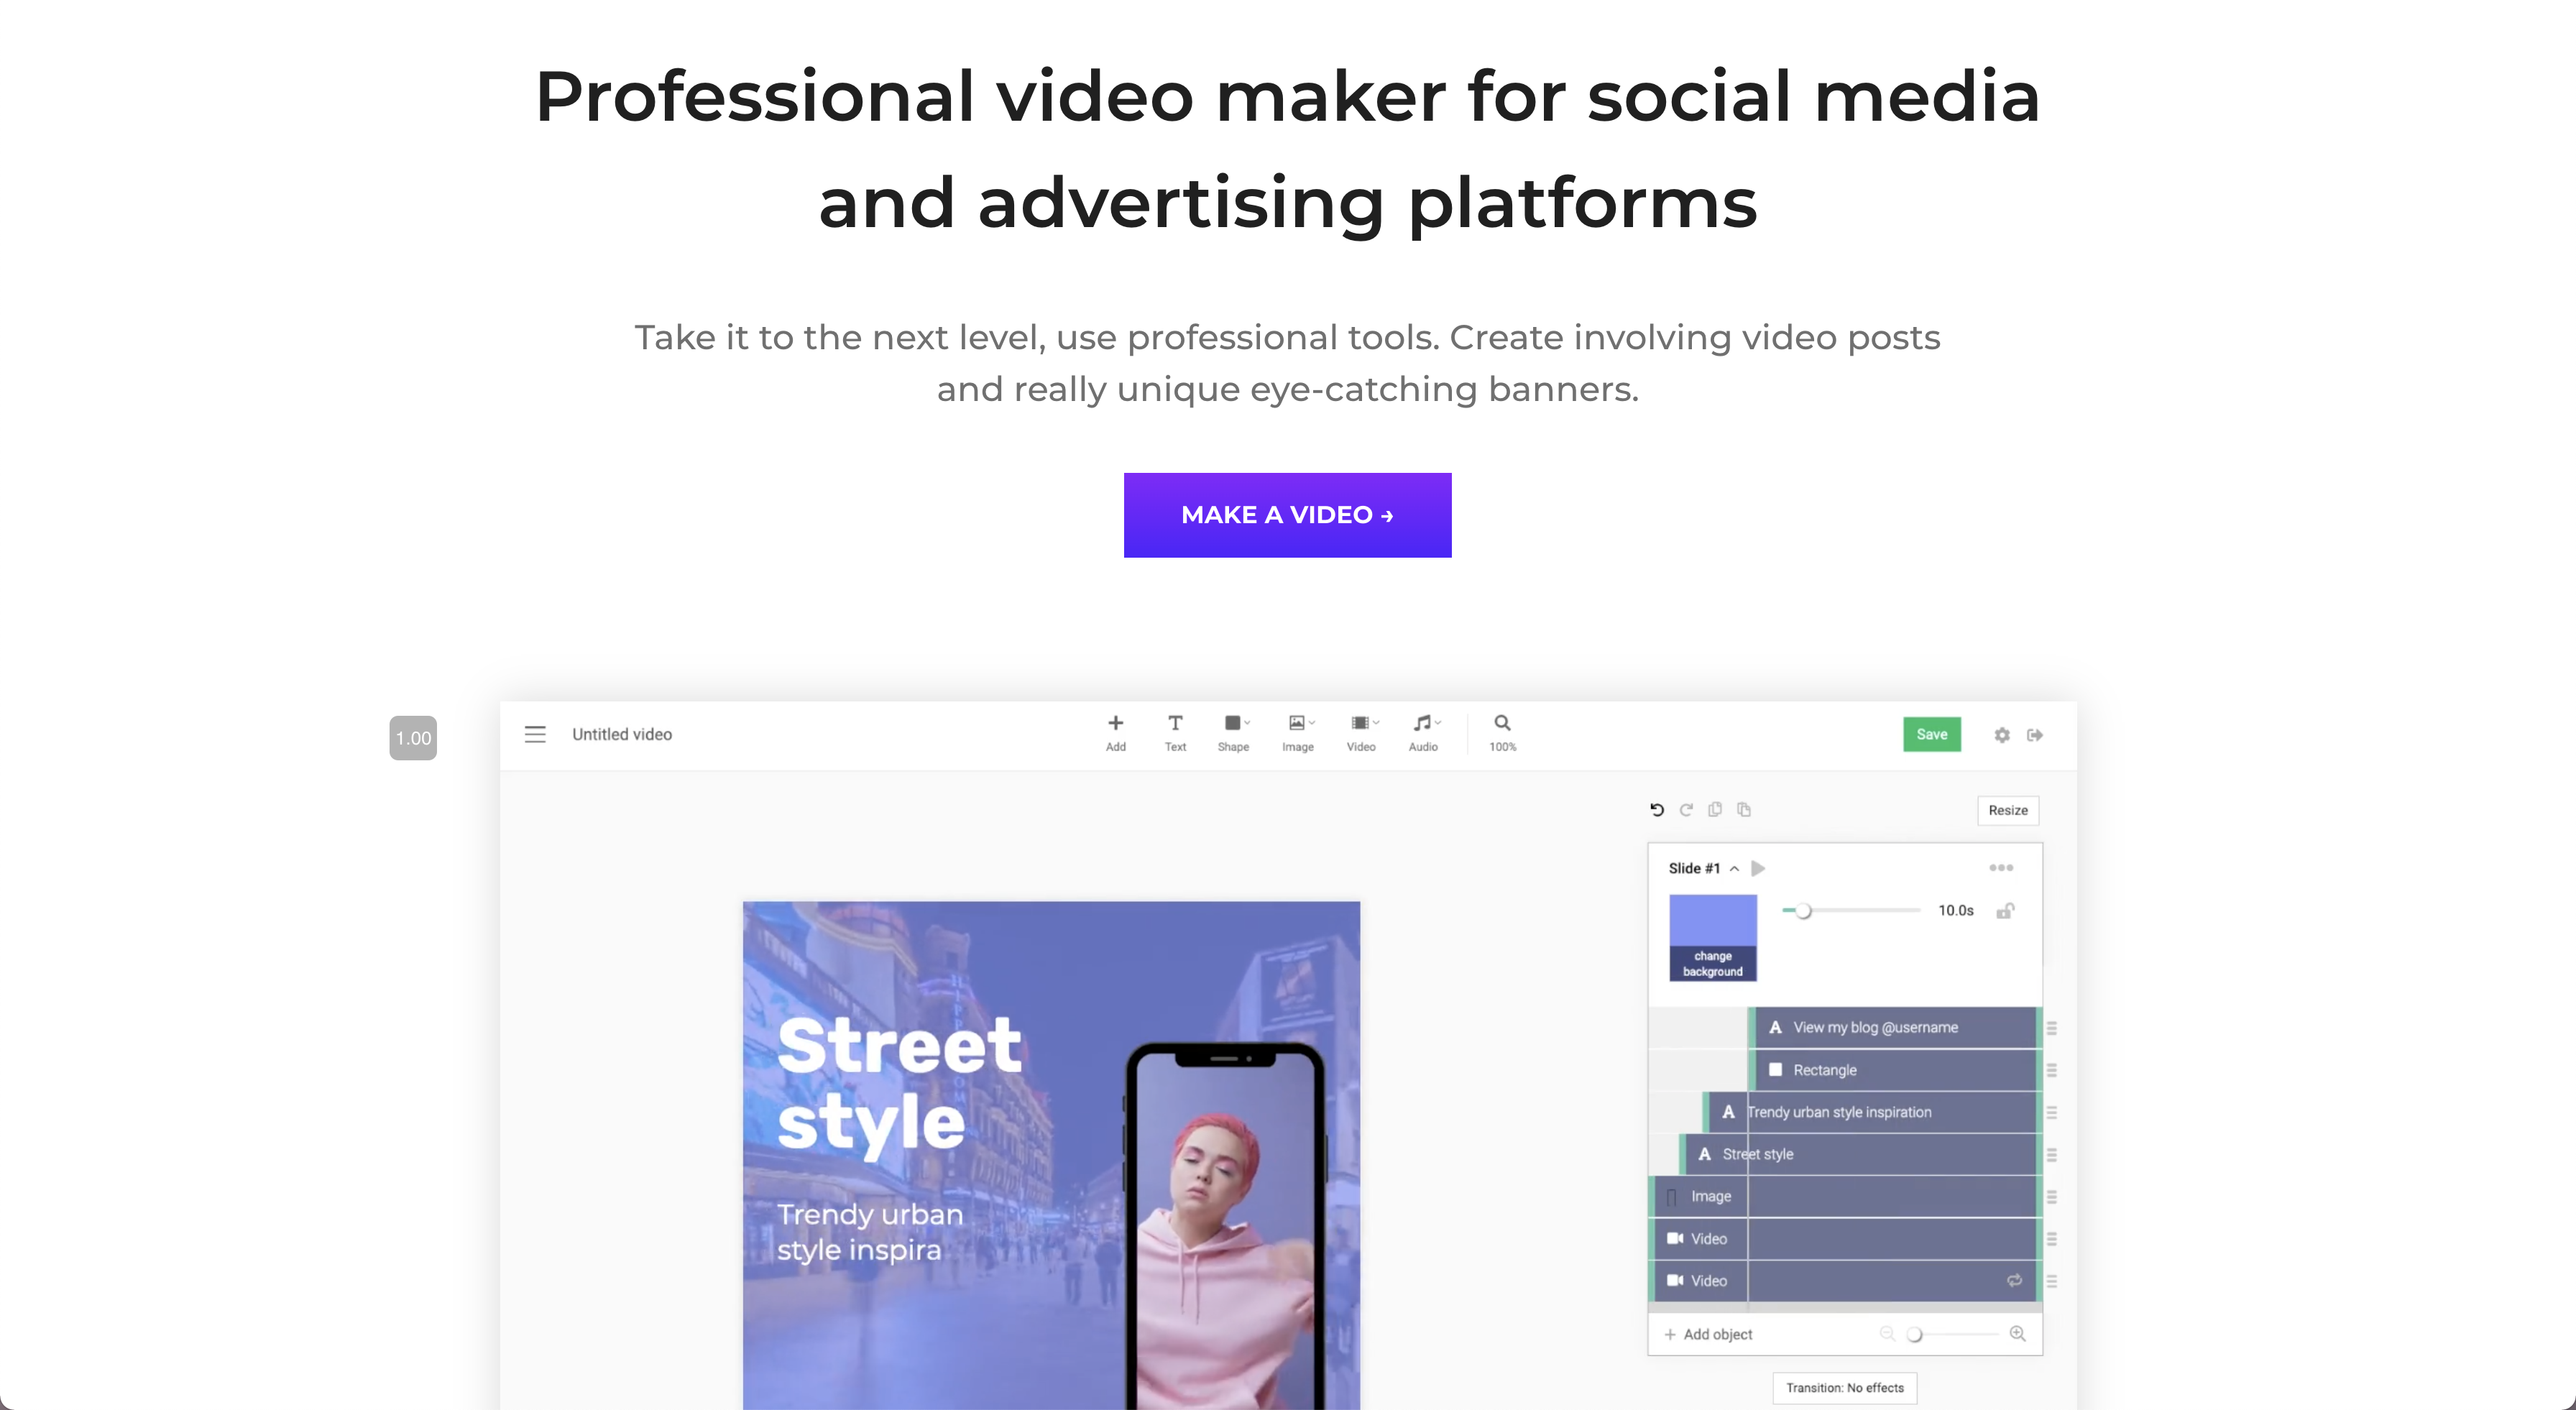 Supa :  Easy to use video maker for ads and social media